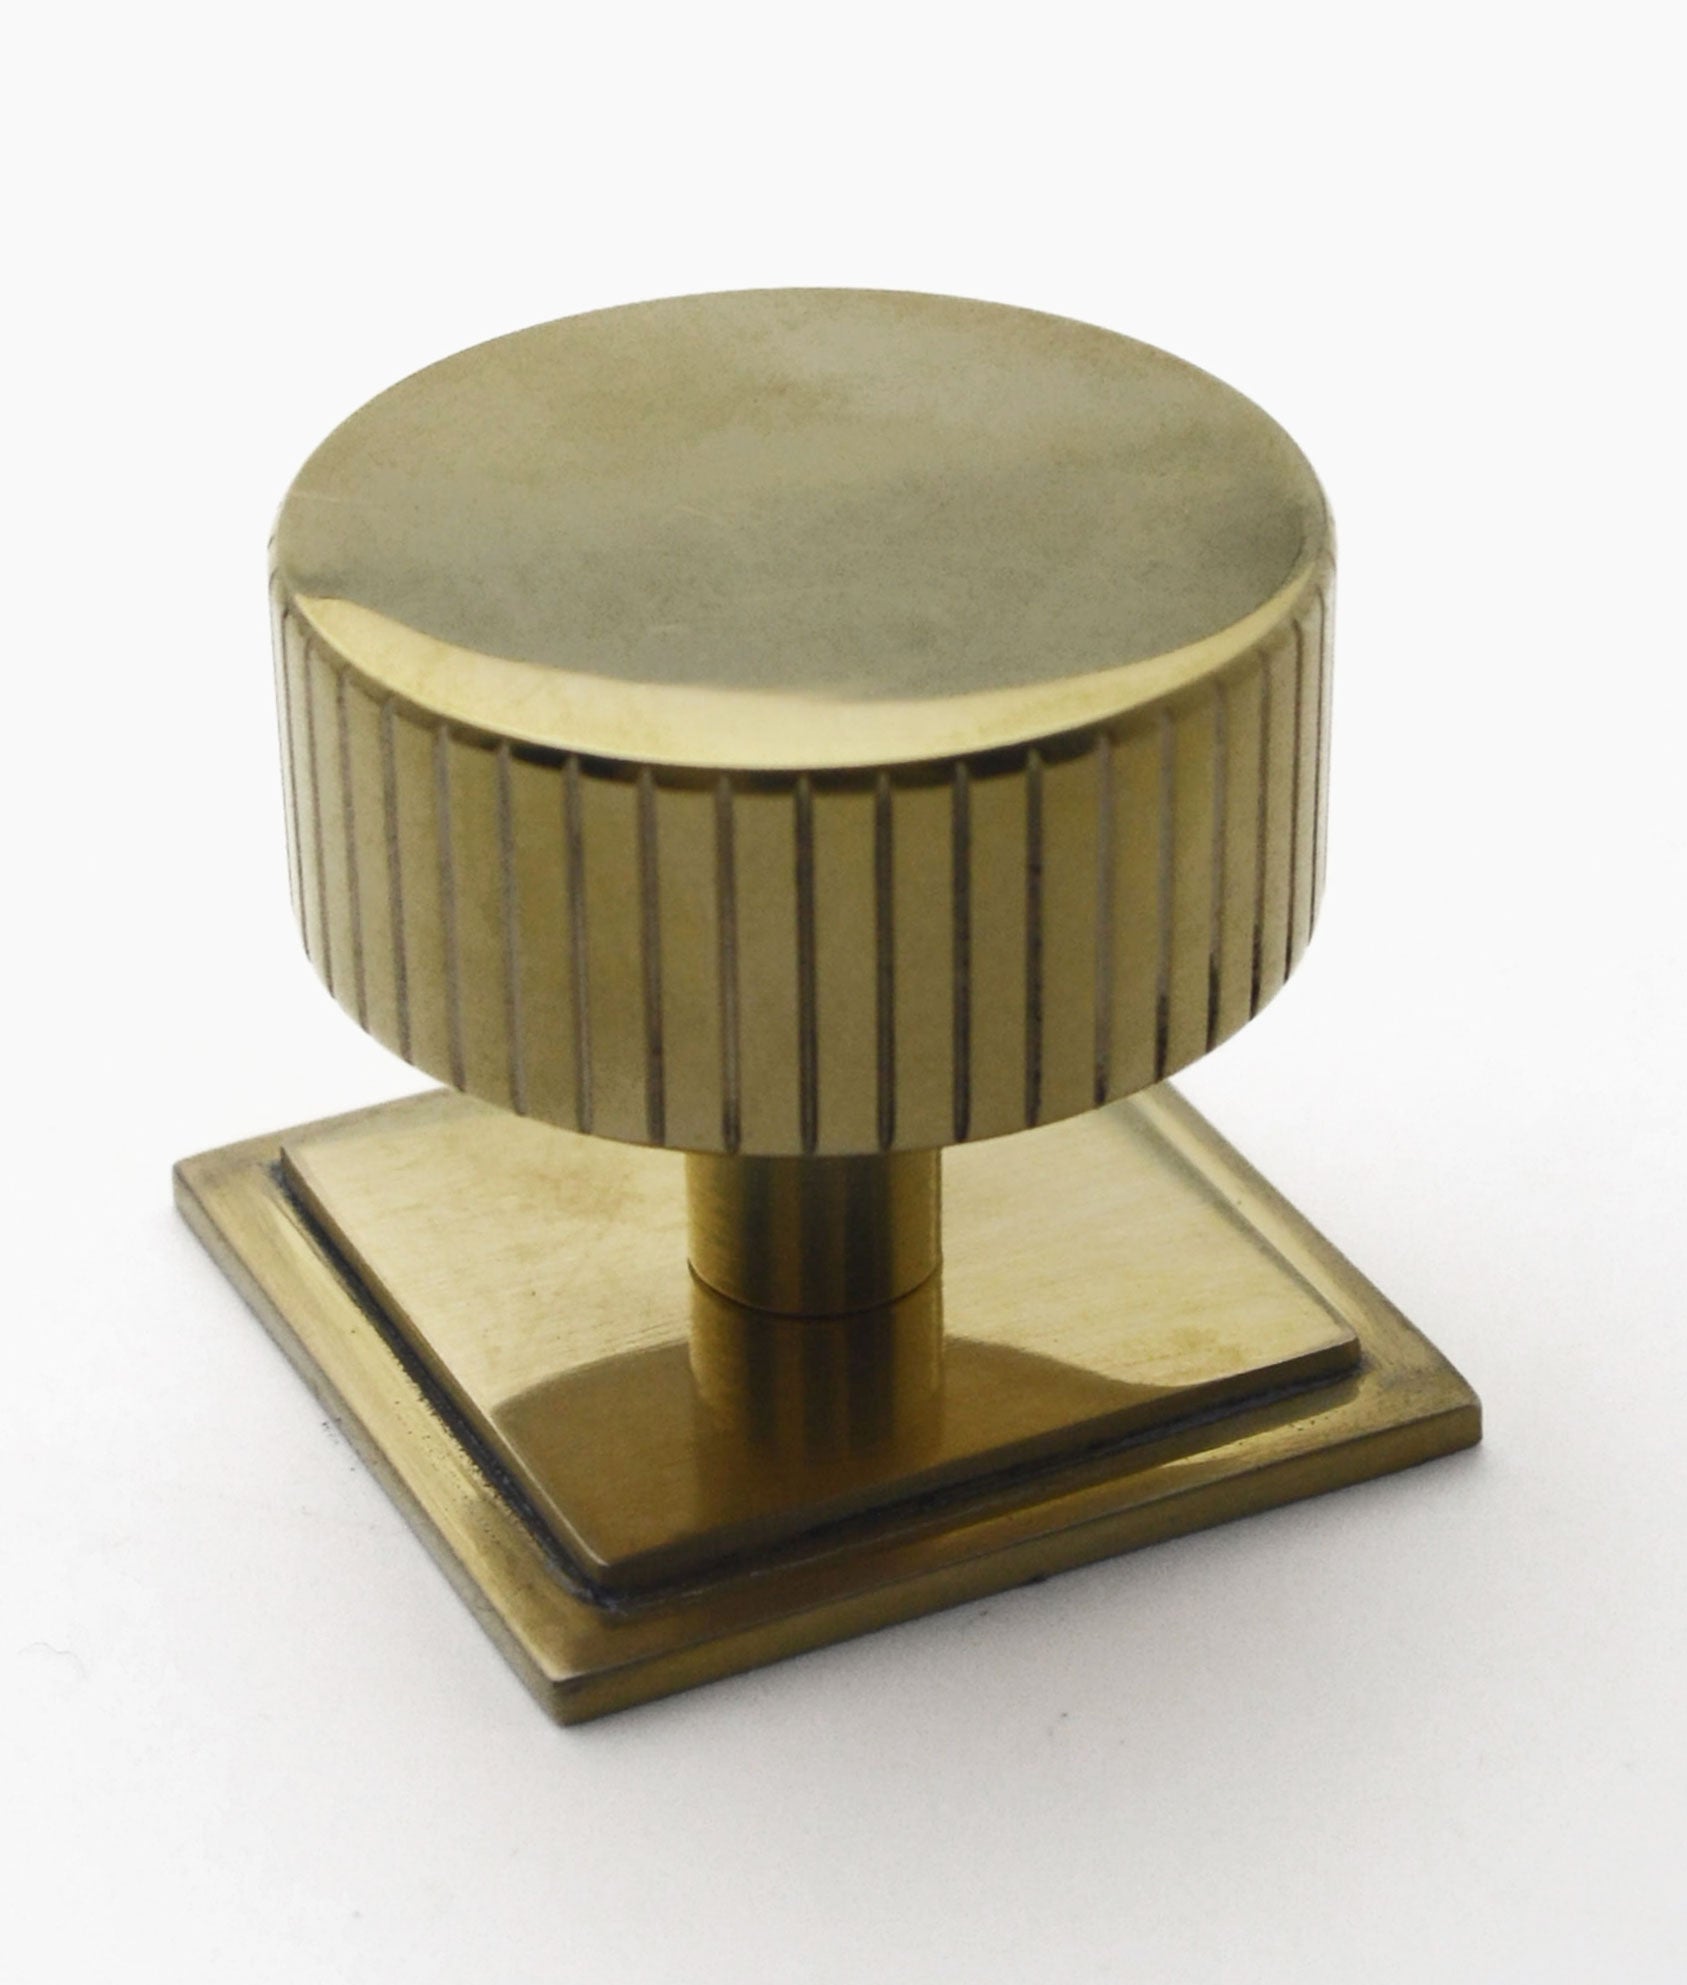 Unlacquered Polished Brass Dalcross Linear Cabinet Knob on Square Plate